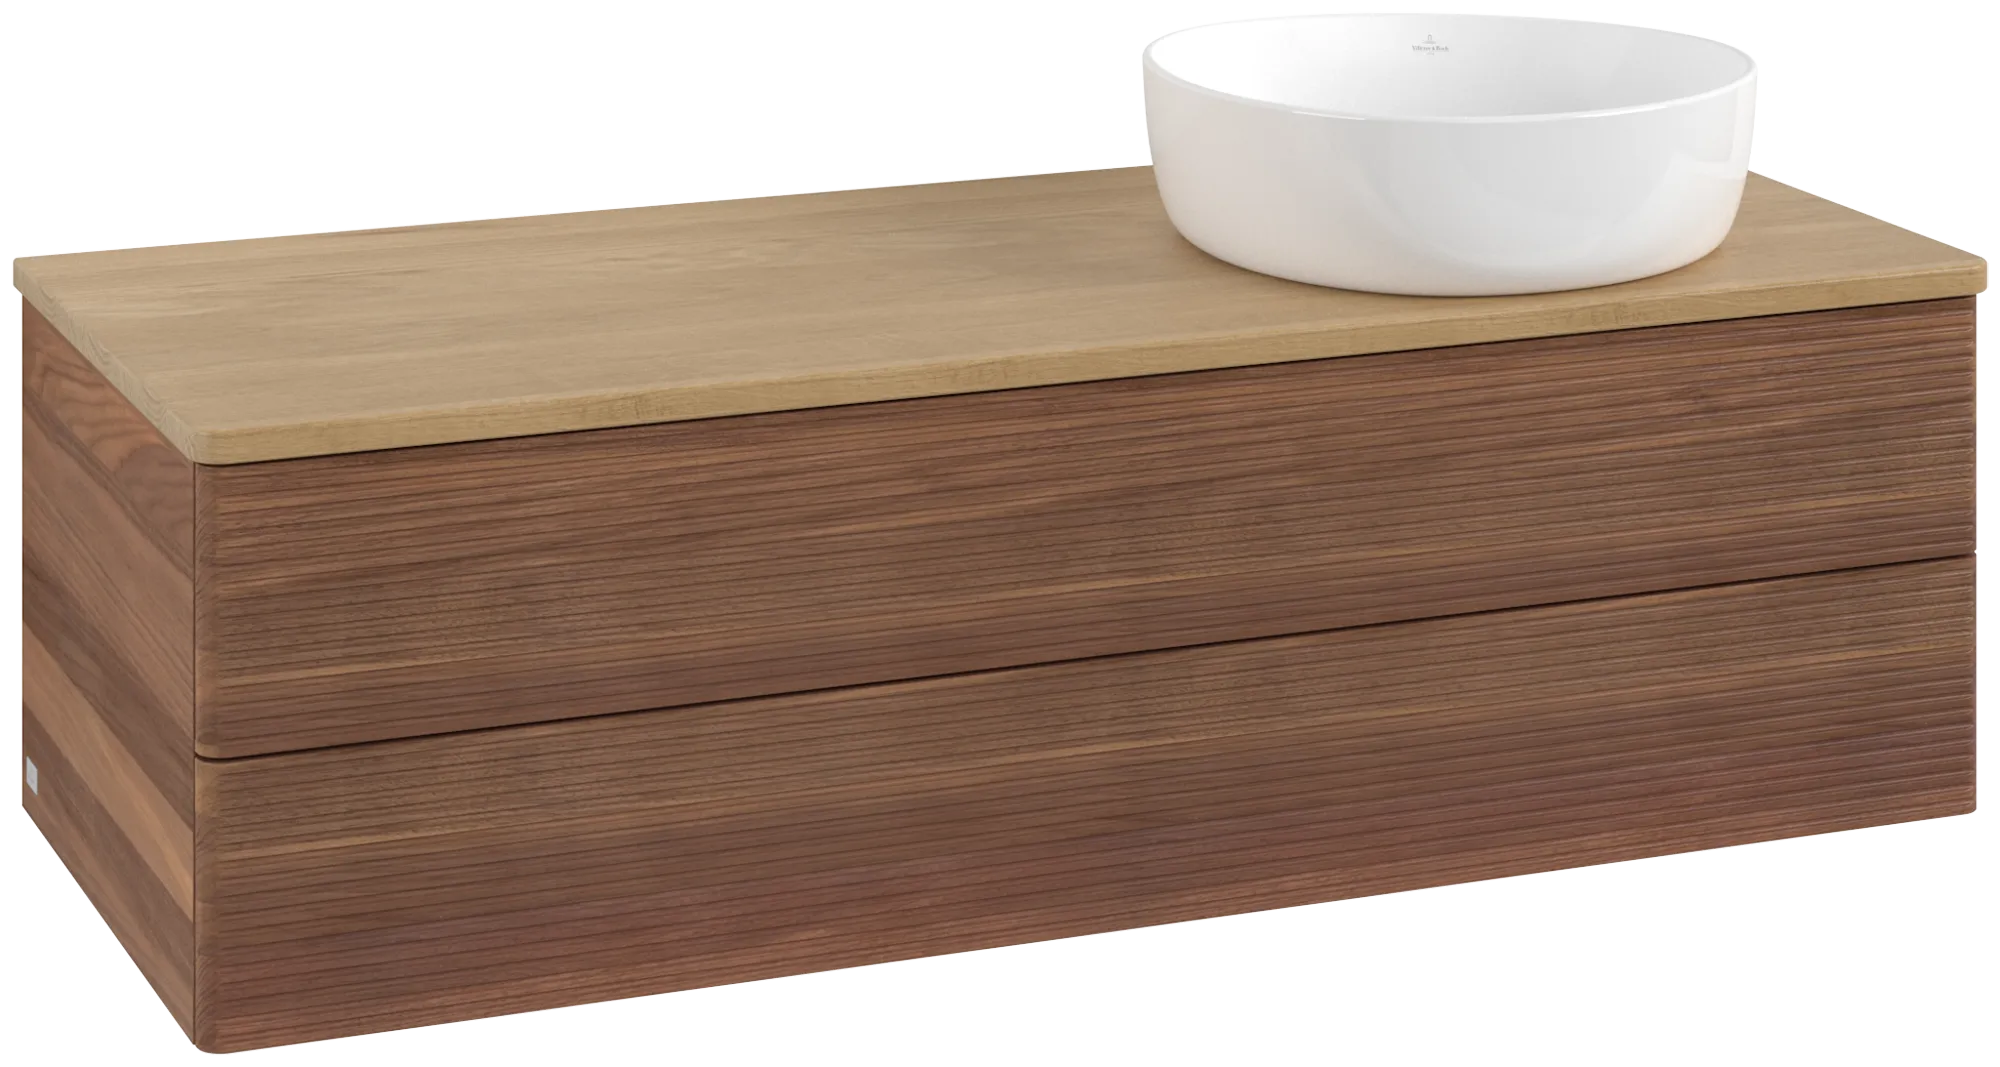 Obrázek VILLEROY BOCH Antao Vanity unit, with lighting, 2 pull-out compartments, 1200 x 360 x 500 mm, Front with grain texture, Warm Walnut / Honey Oak #L23111HM